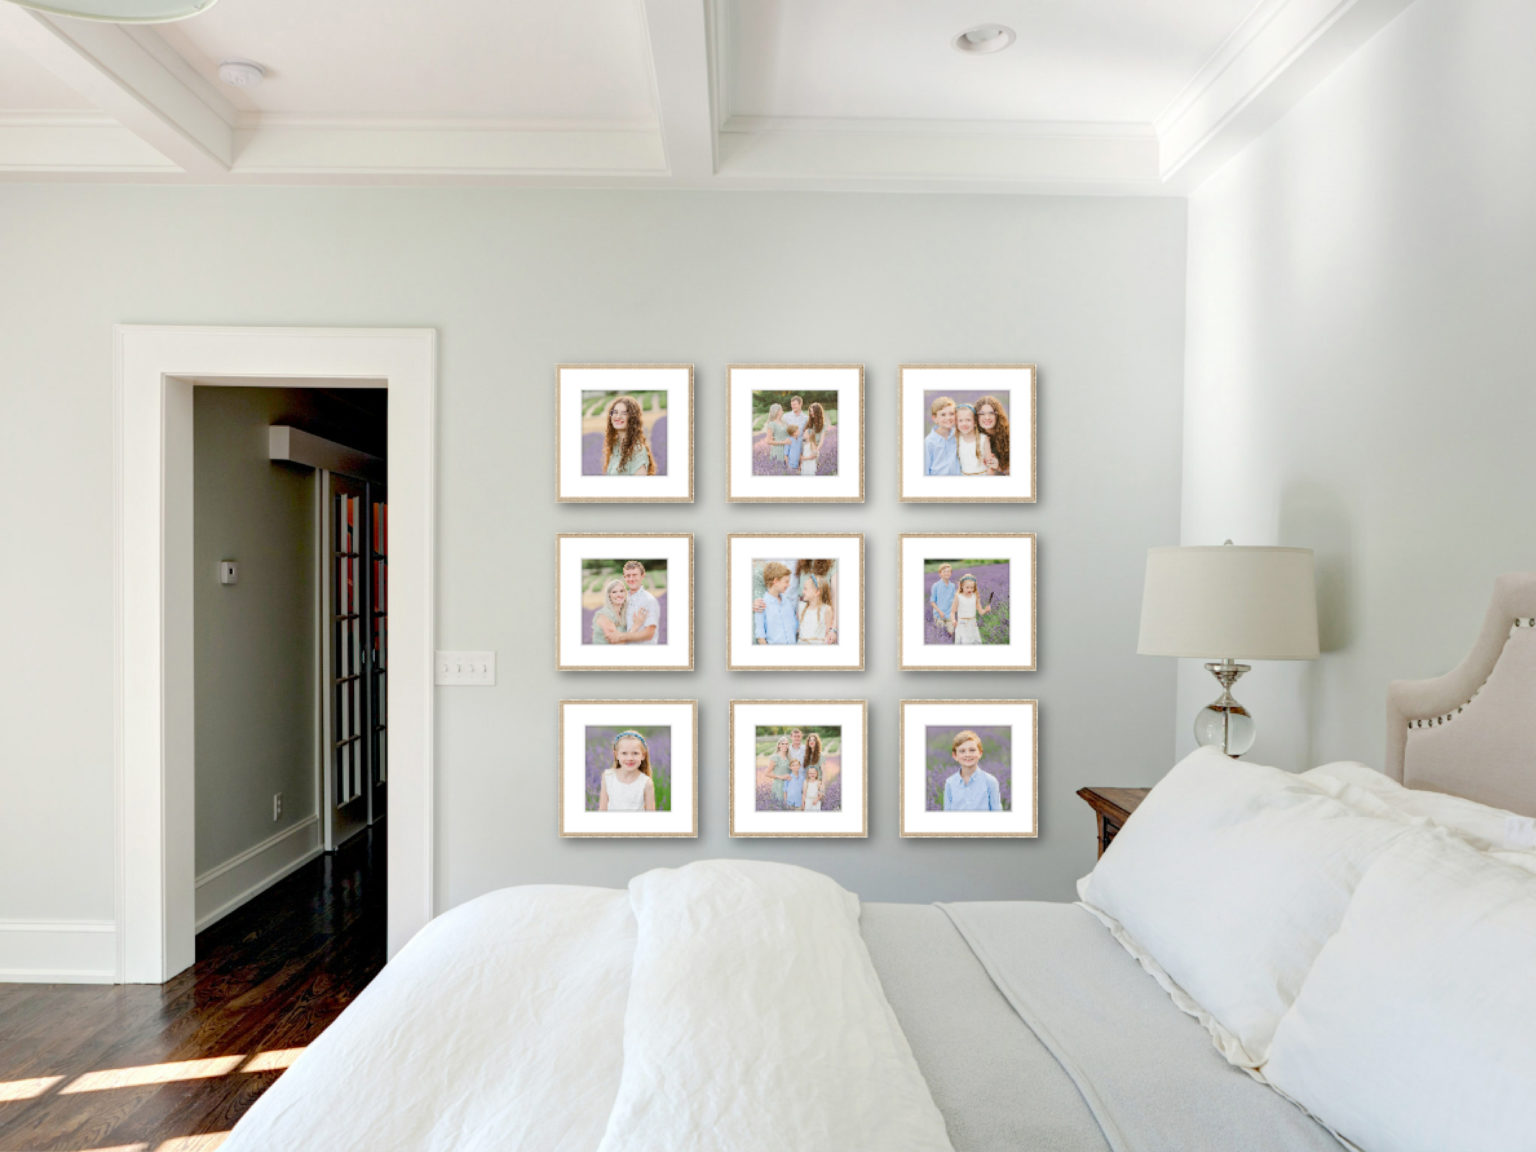 Gallery Wall In Bedroom Decorating With Family Photos 1536x1152 